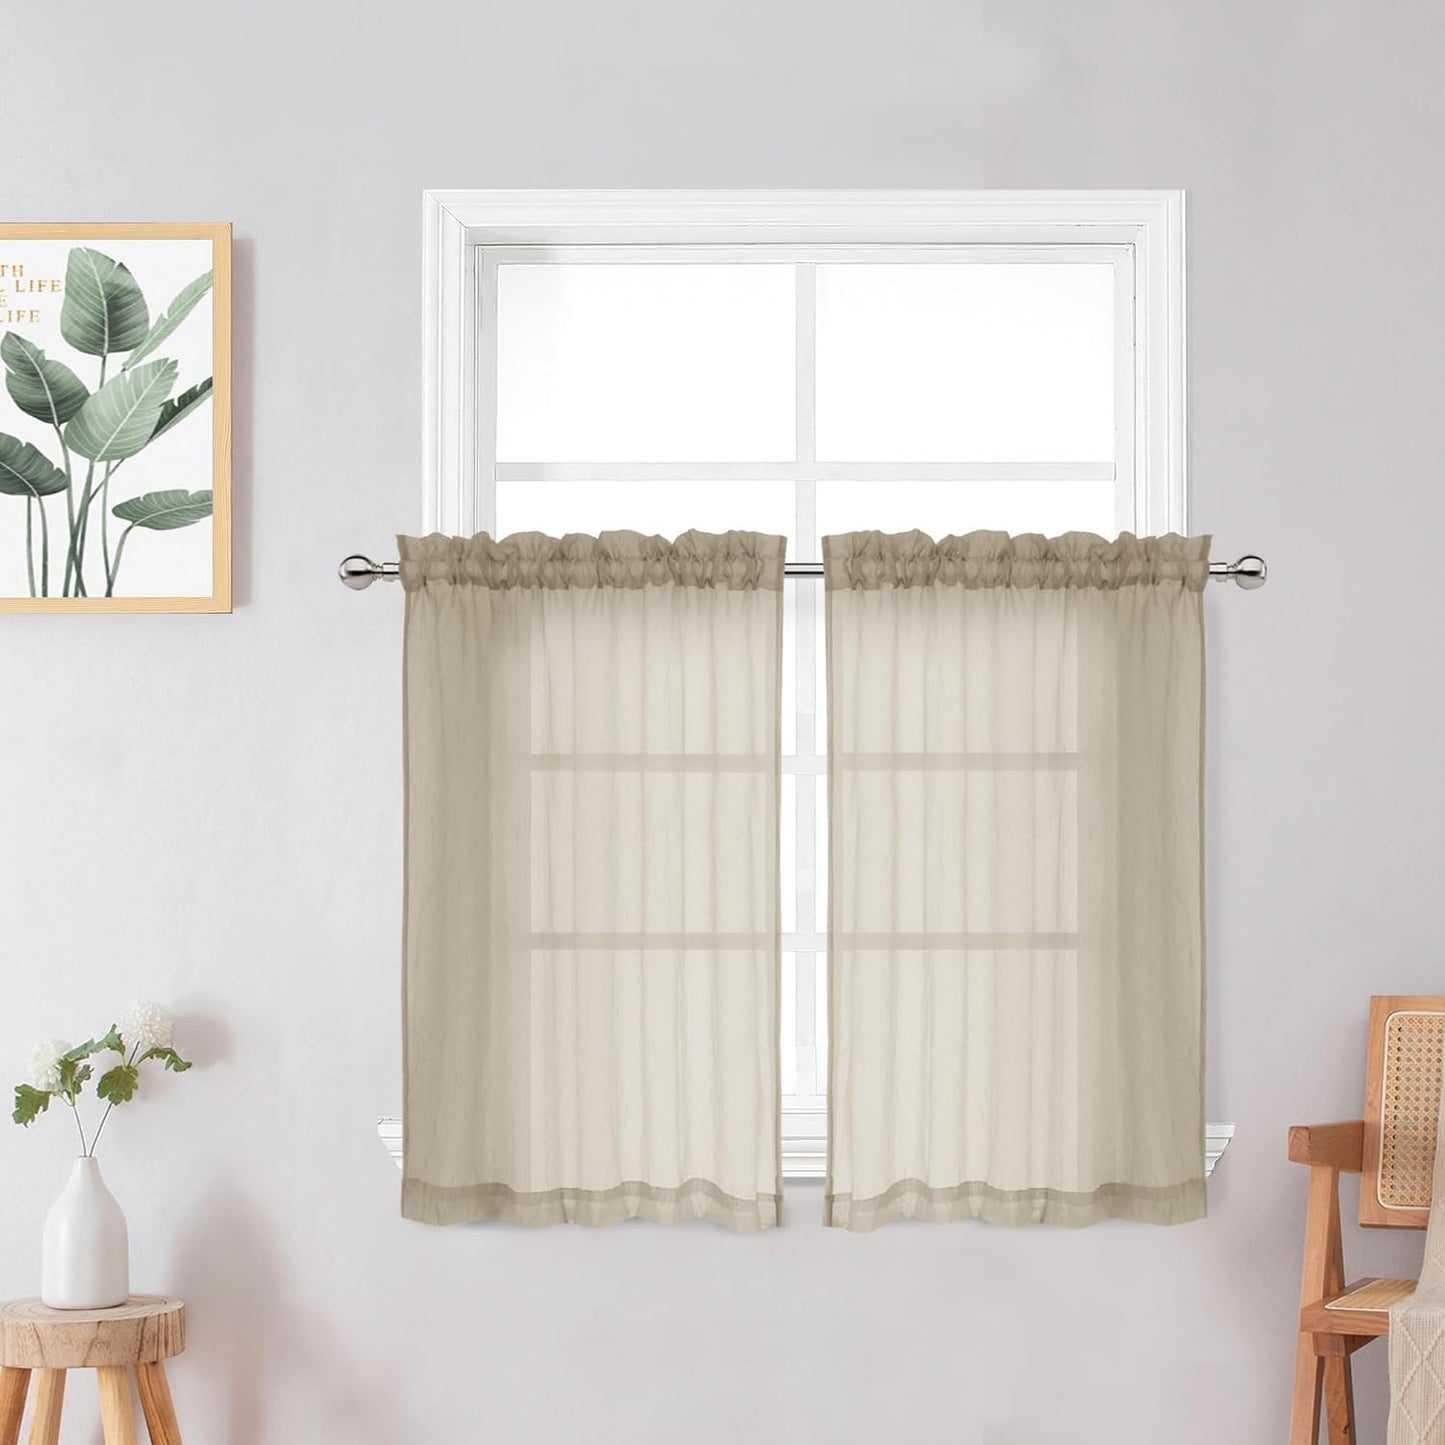 Crushed Sheer White Curtains 63 Inch Length 2 Panels, Light Filtering Solid Crinkle Voile Short Sheer Curtian for Bedroom Living Room, Each 42Wx63L Inches  Chyhomenyc Taupe 28 W X 36 L 